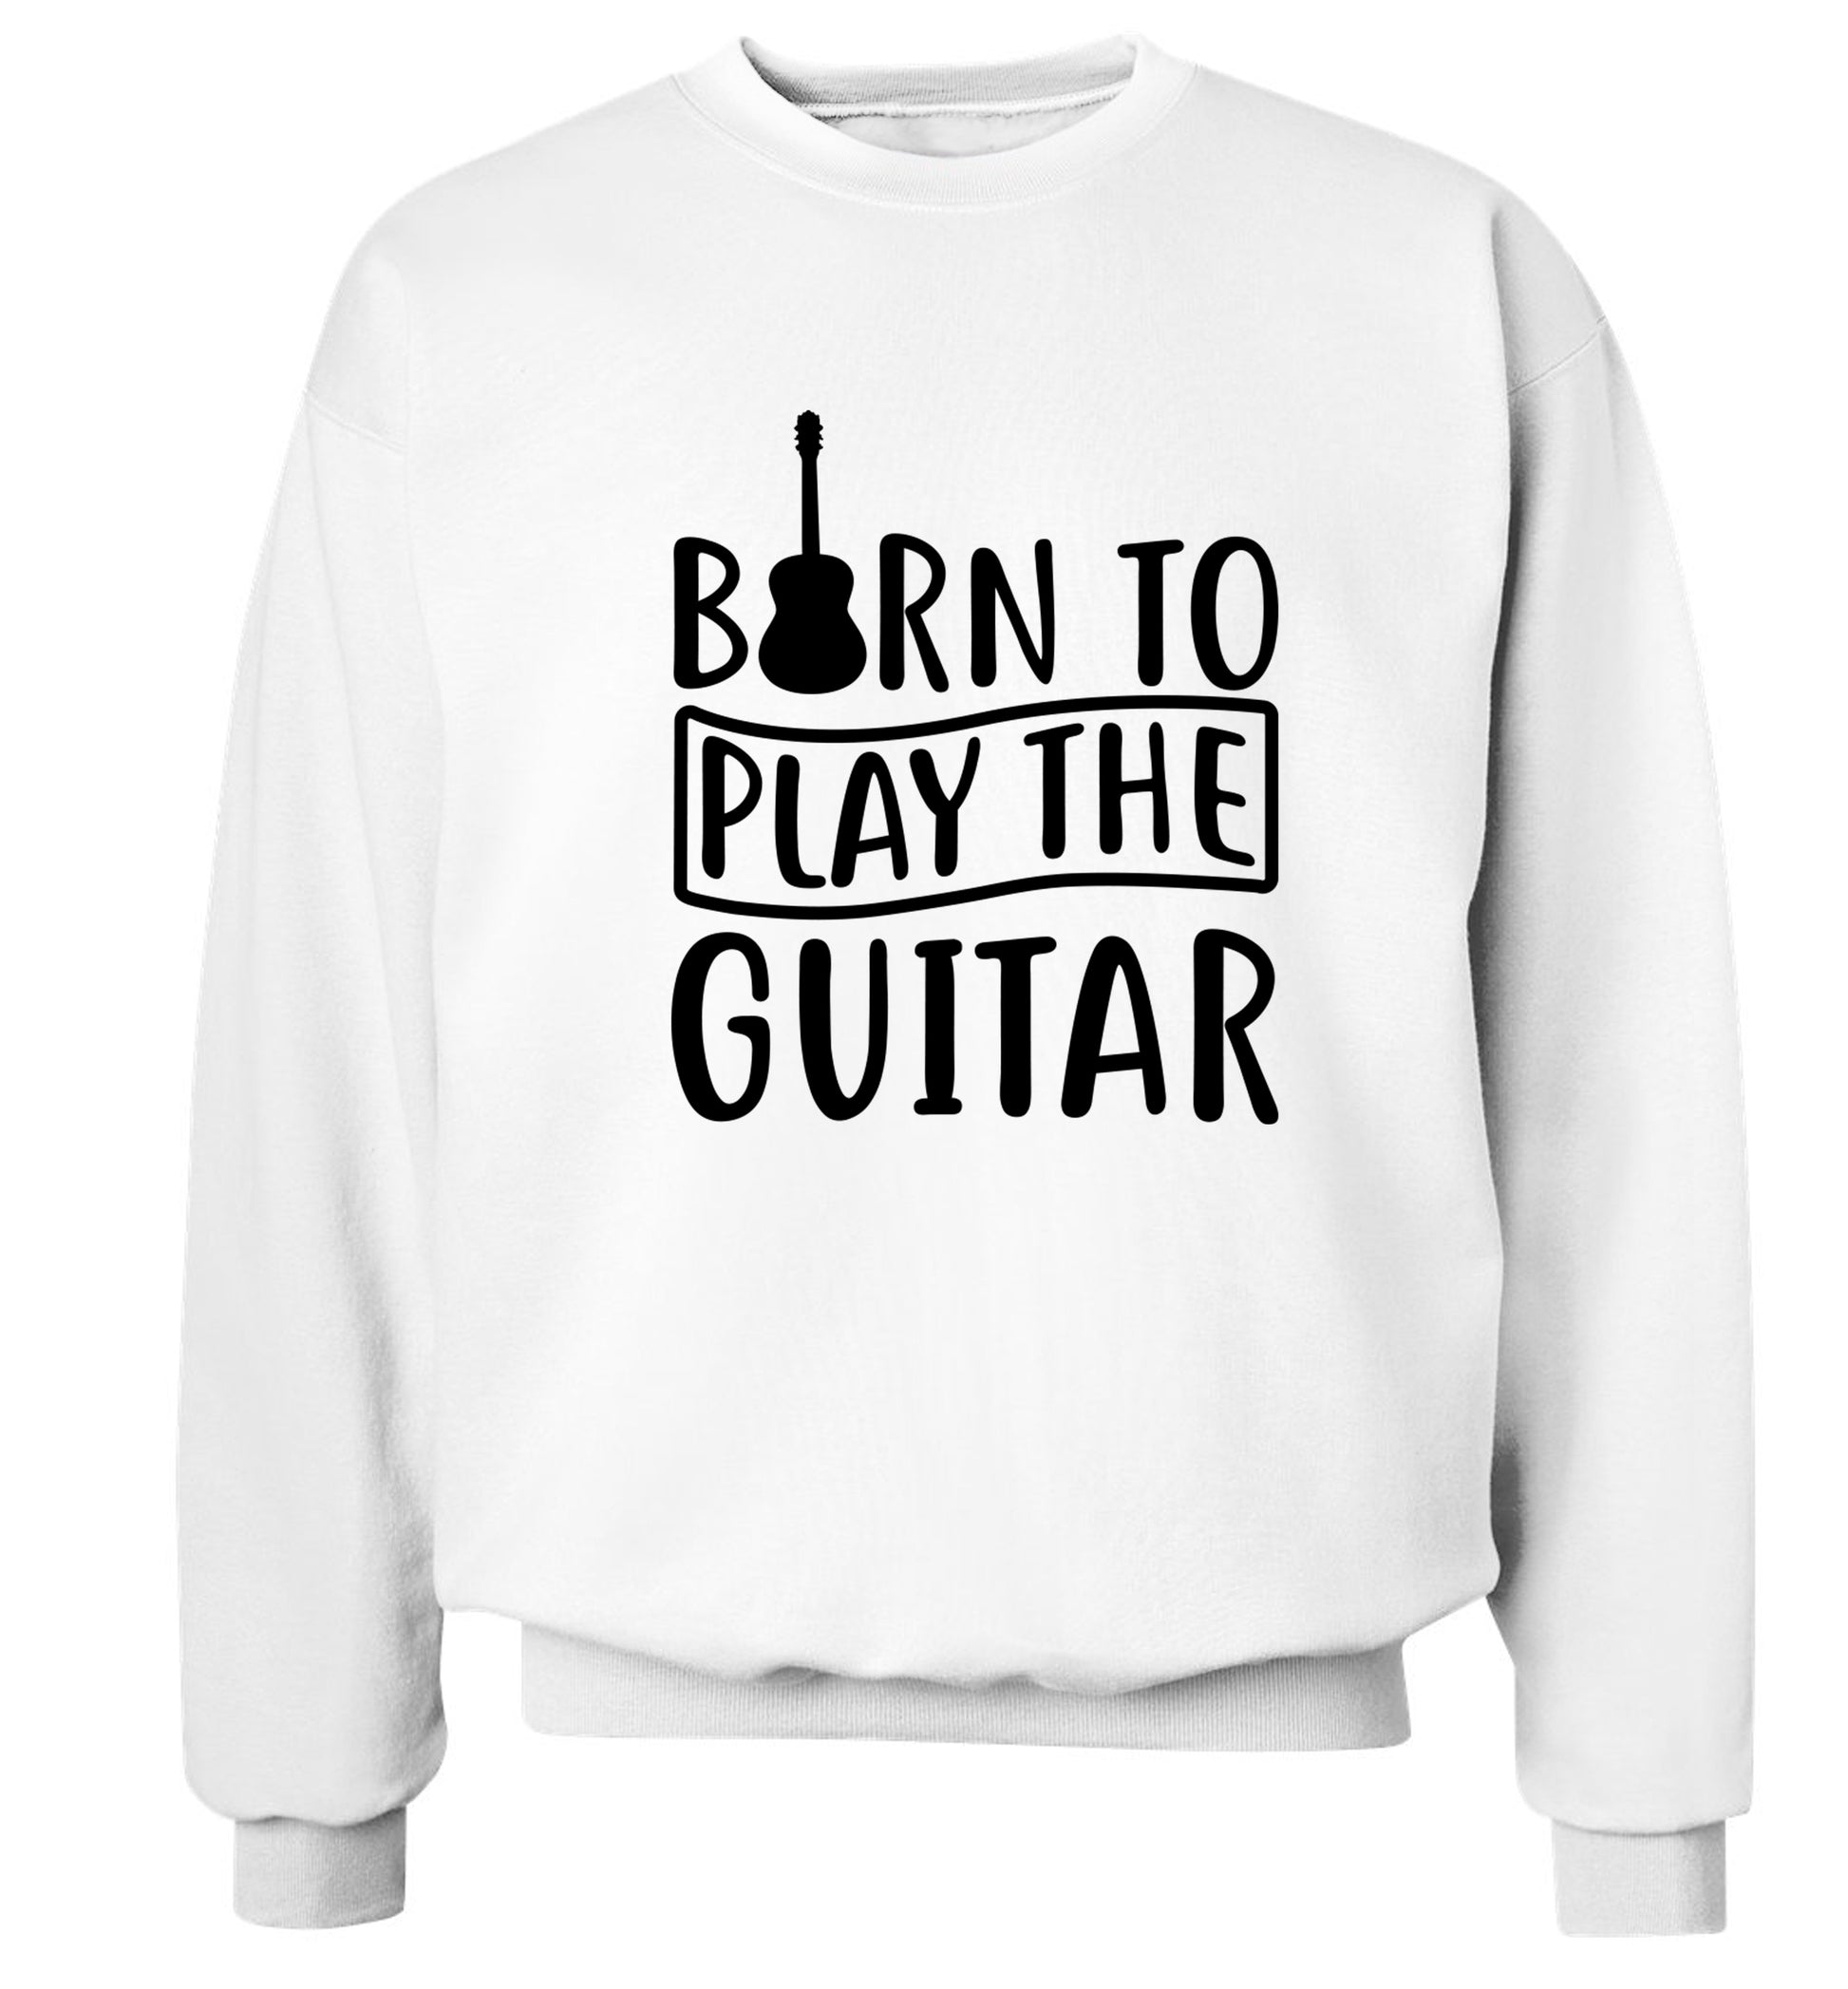 Born to play the guitar Adult's unisex white Sweater 2XL